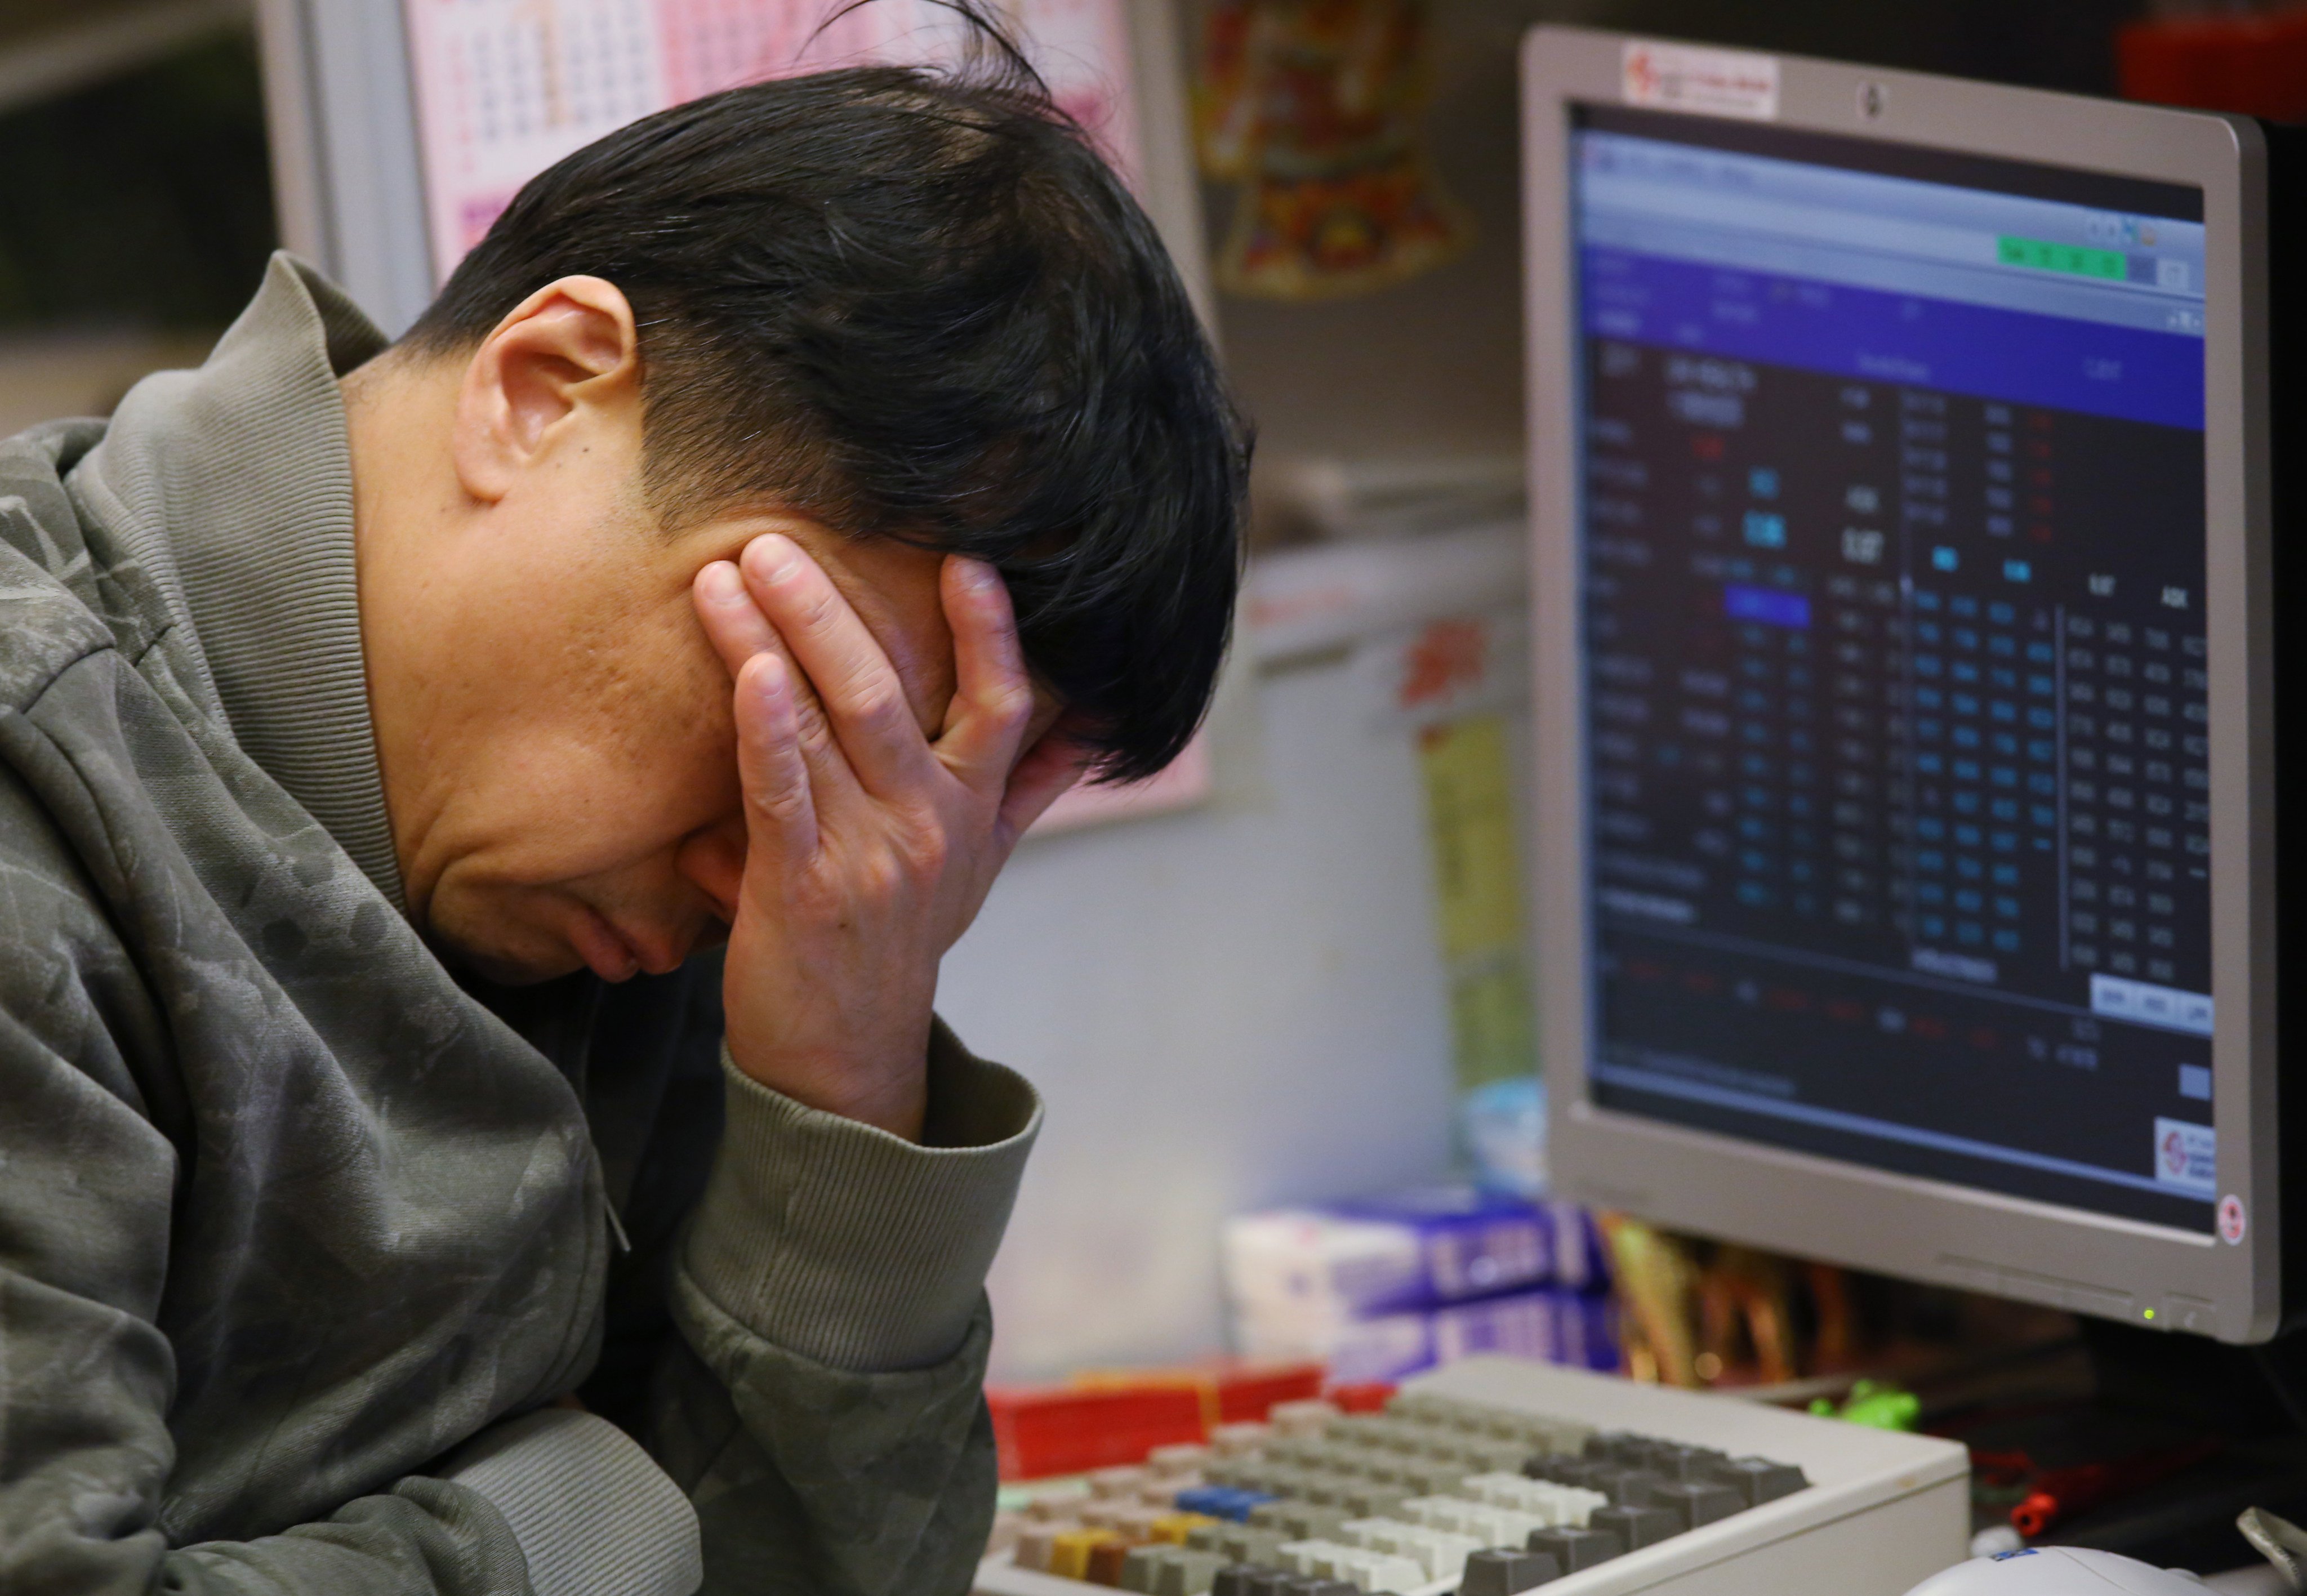 A trader on the floor at the Hong Kong Stock Exchange in 2016. Crises seem to be plaguing the global economy on a regular basis these days, but that is no excuse for policymakers to ignore their responsibilities and hide behind the excuse of “unprecedented events”. Photo: Sam Tsang